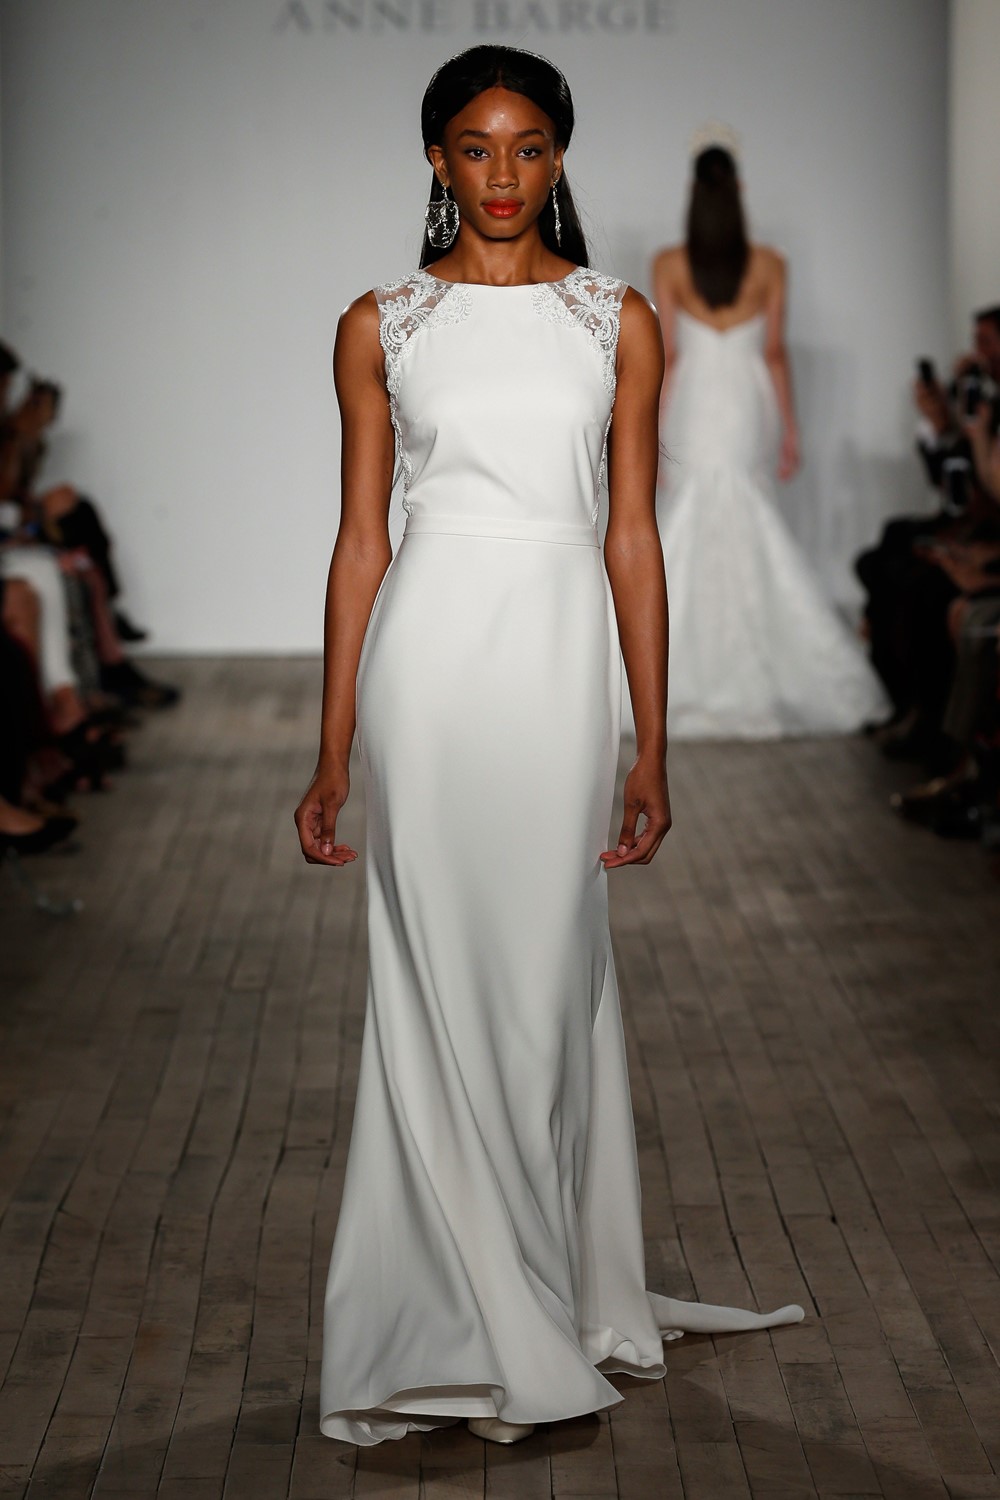 2019 Bridal Trends - Understated Anne Barge Fall 2019 Bridal